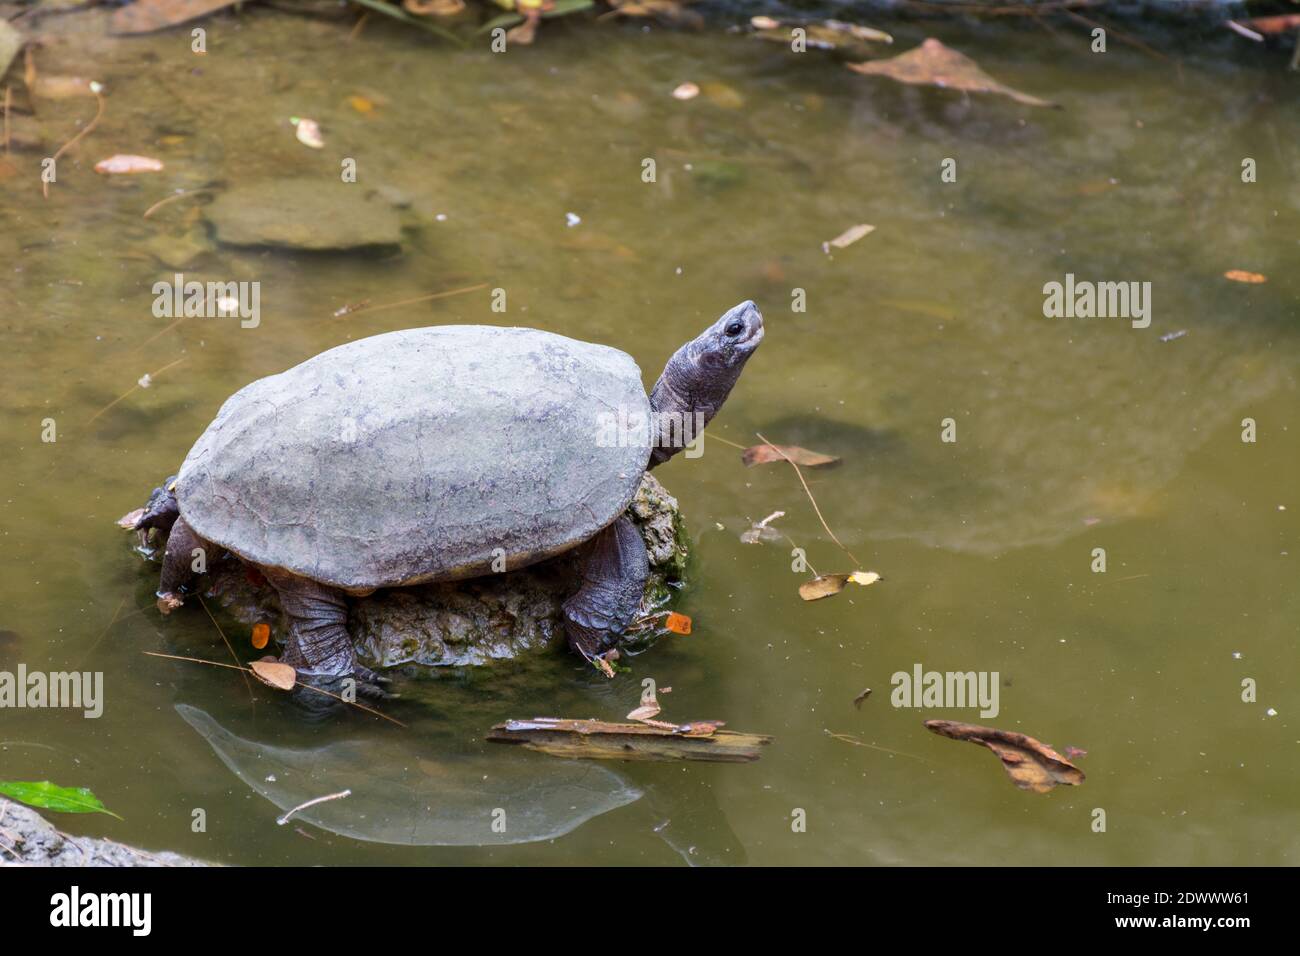 A cute turtle looking up and resting on rock at in the pond of the Nehru Zoological Park - Hyderabad, India Stock Photo